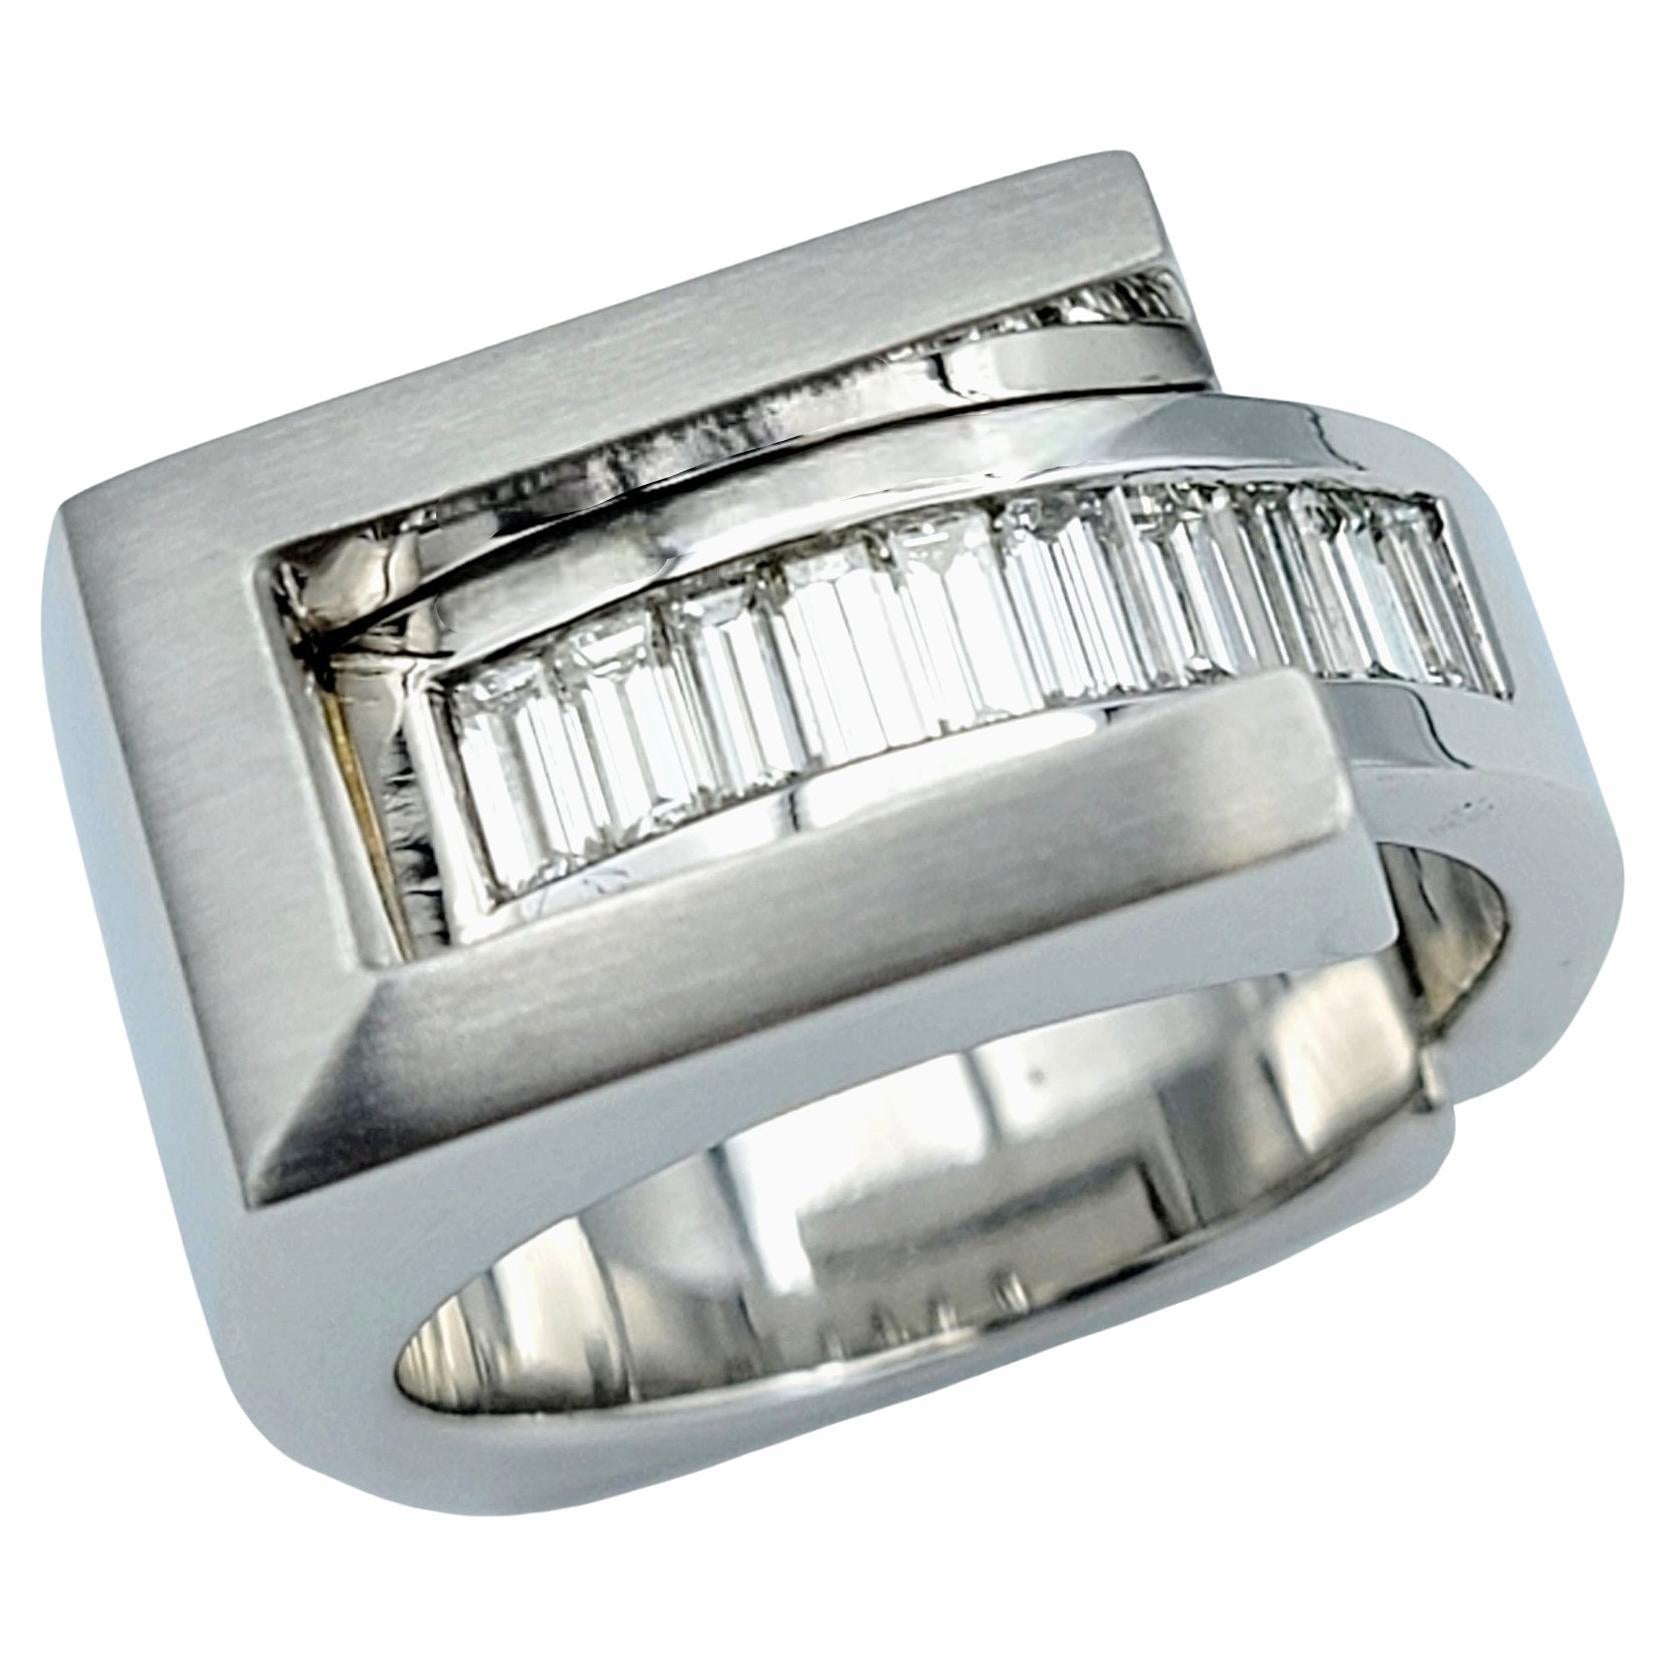 Contemporary Gauthier Mens Asymmetrical Baguette Diamond Band Ring in Brushed & Polished Gold